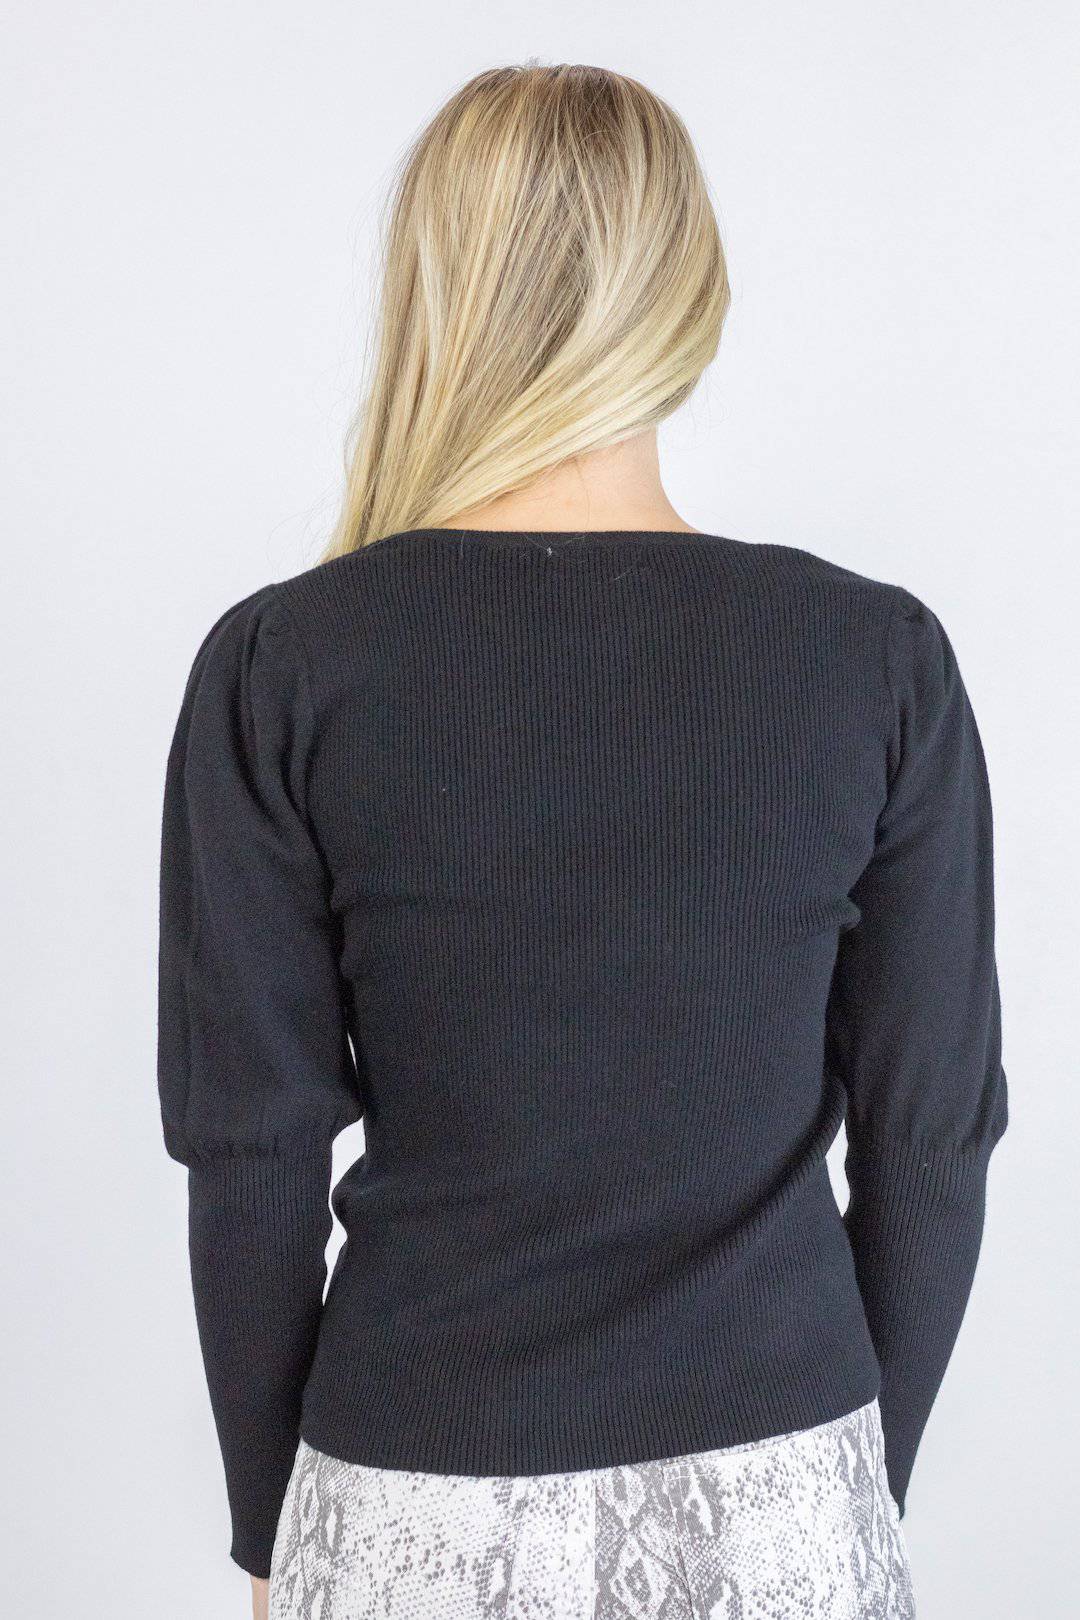 Black Puff Long Sleeve Top - Select Trends Boutique